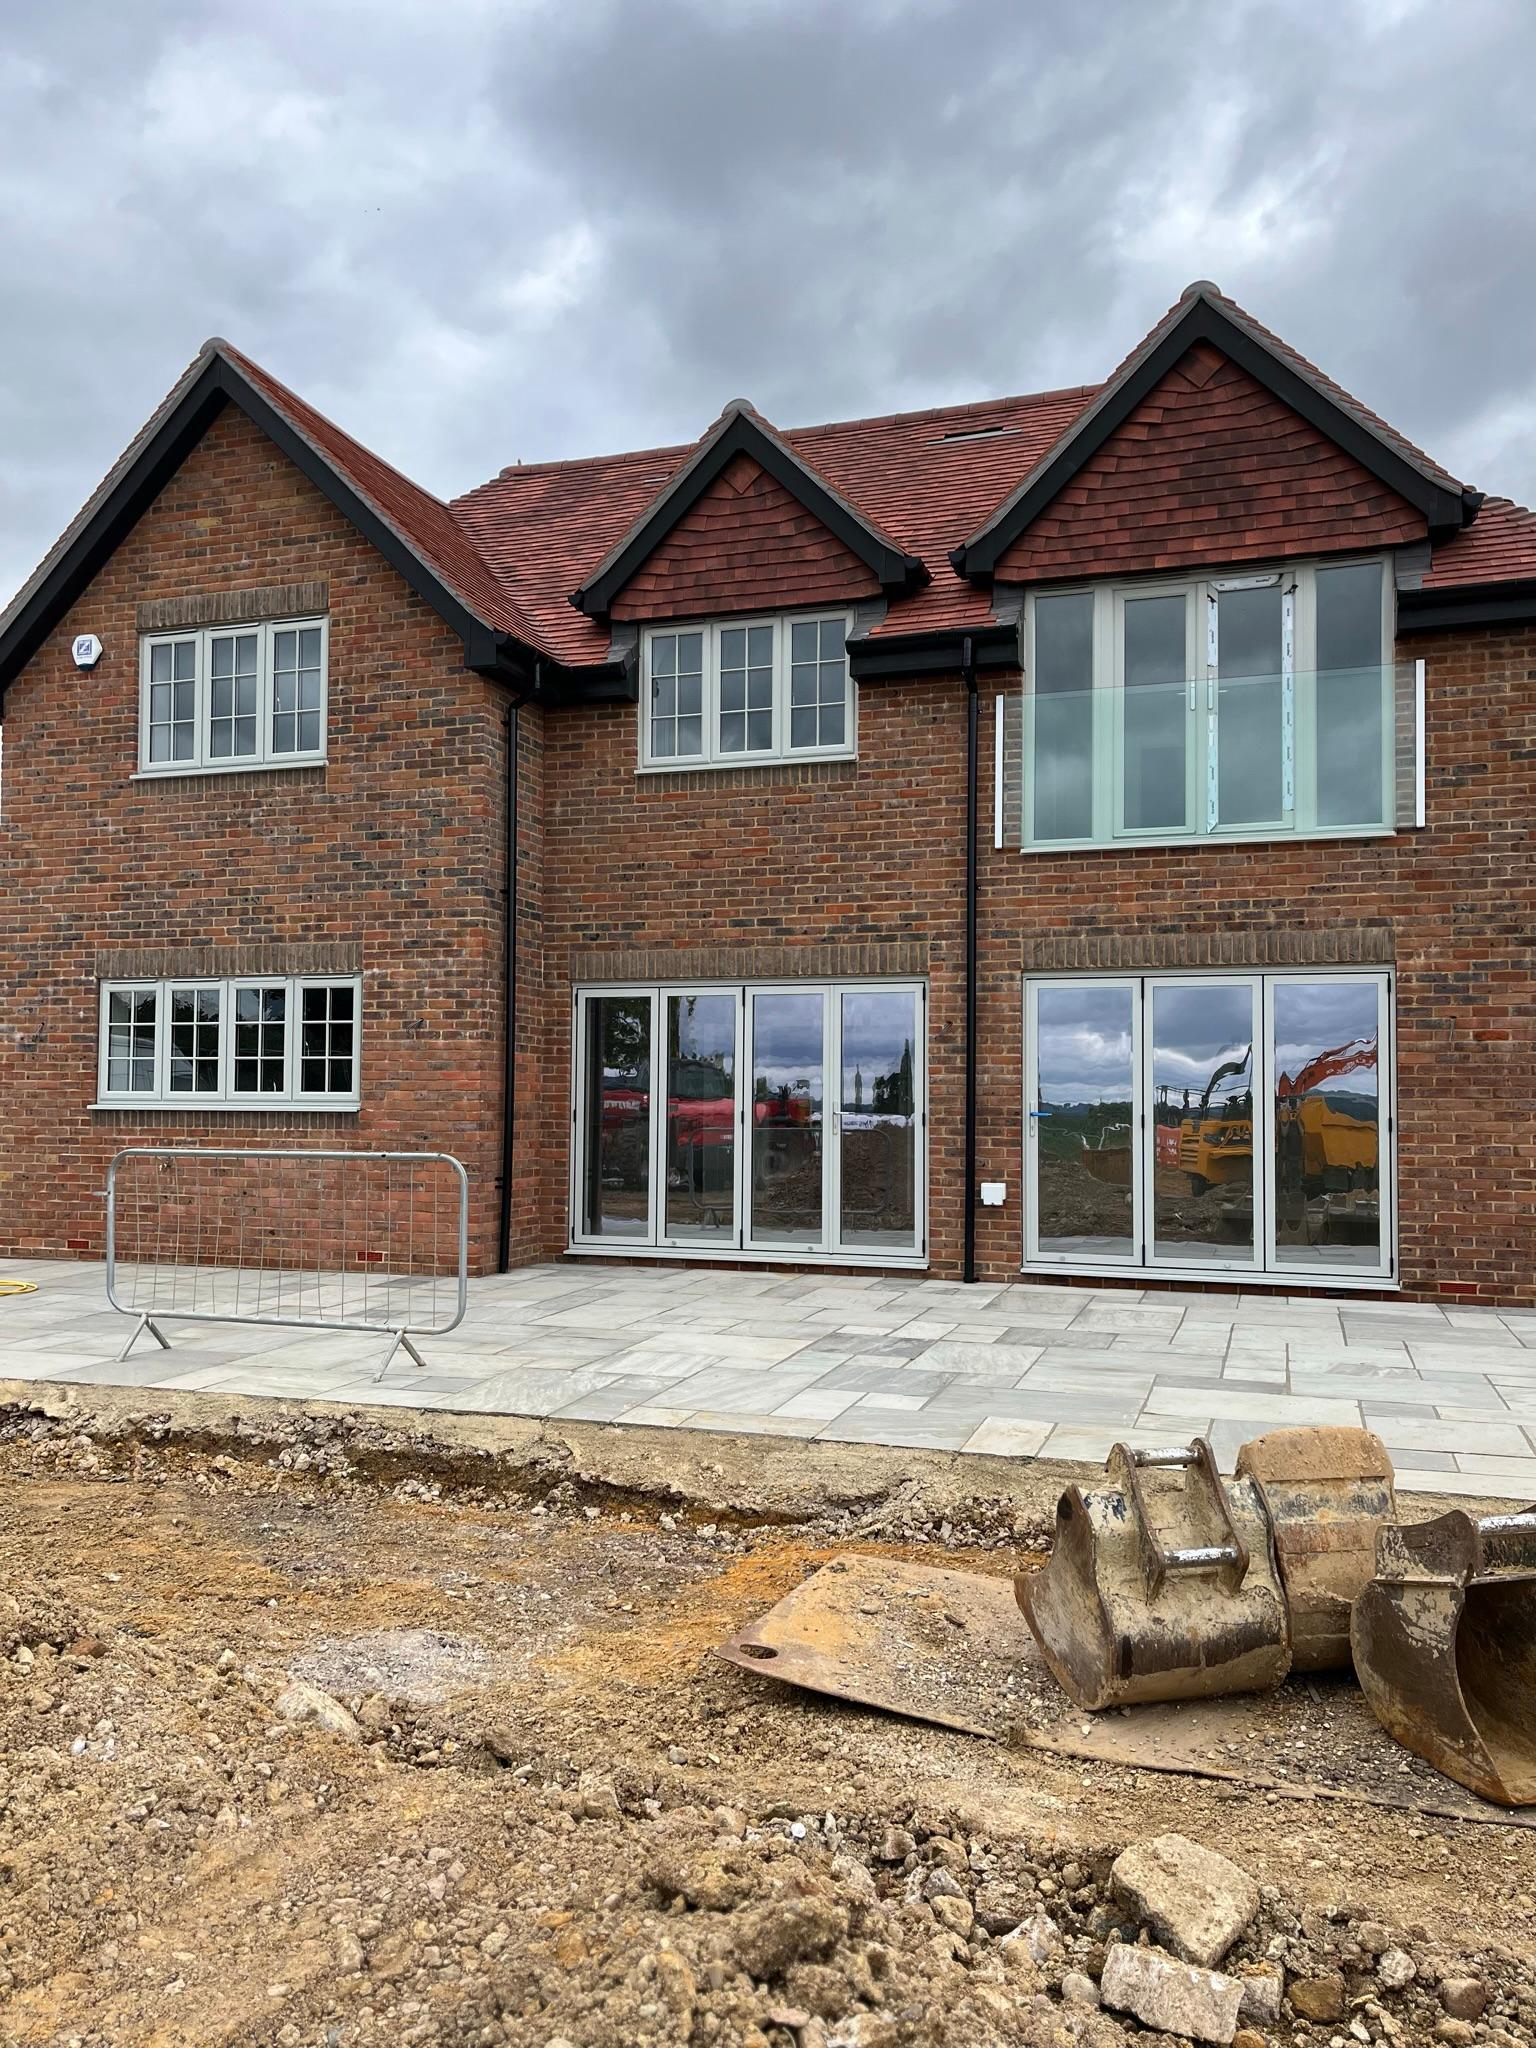 Fully colour matched windows and bi fold doors in this new build development